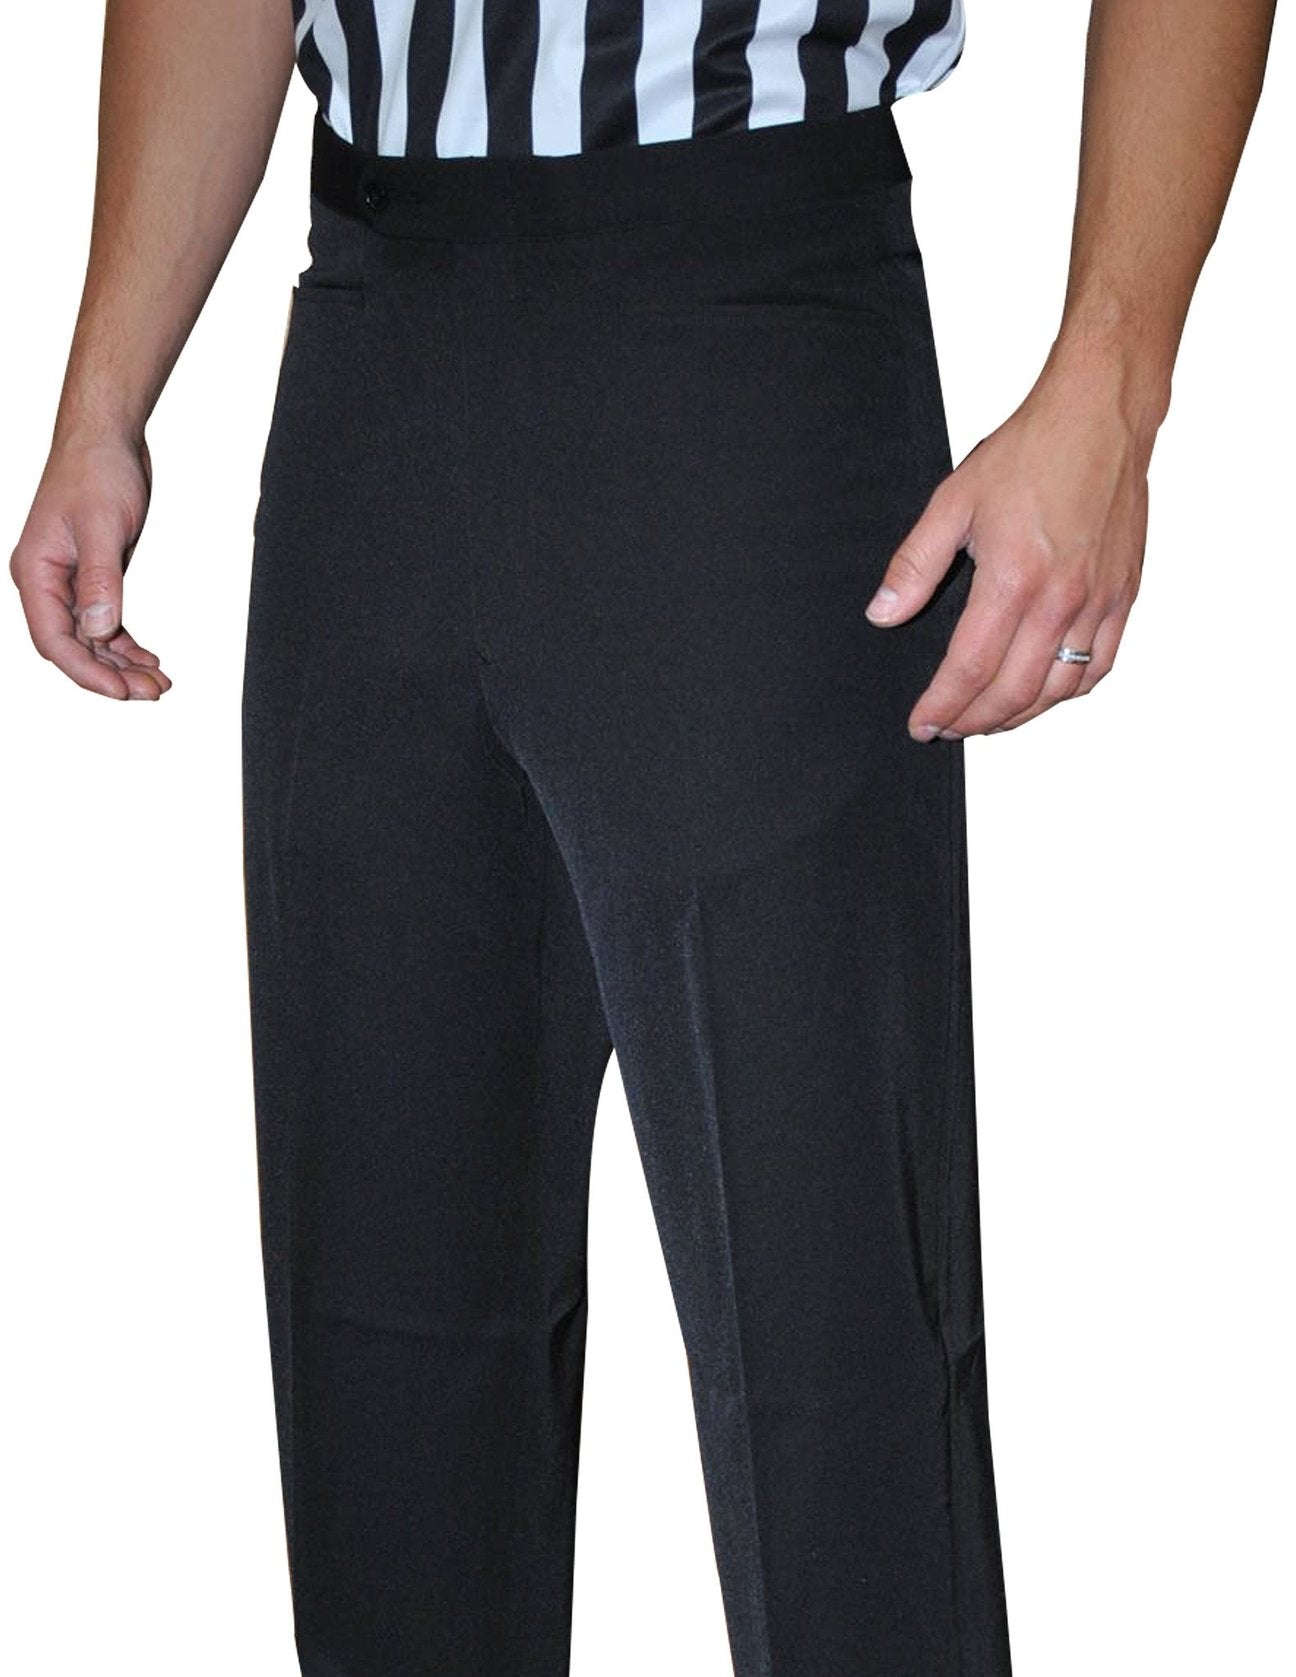 BKS290 - "NEW TAPERED FIT PANTS" Smitty 4-Way Stretch Flat Front Pants w/Western Cut Pockets